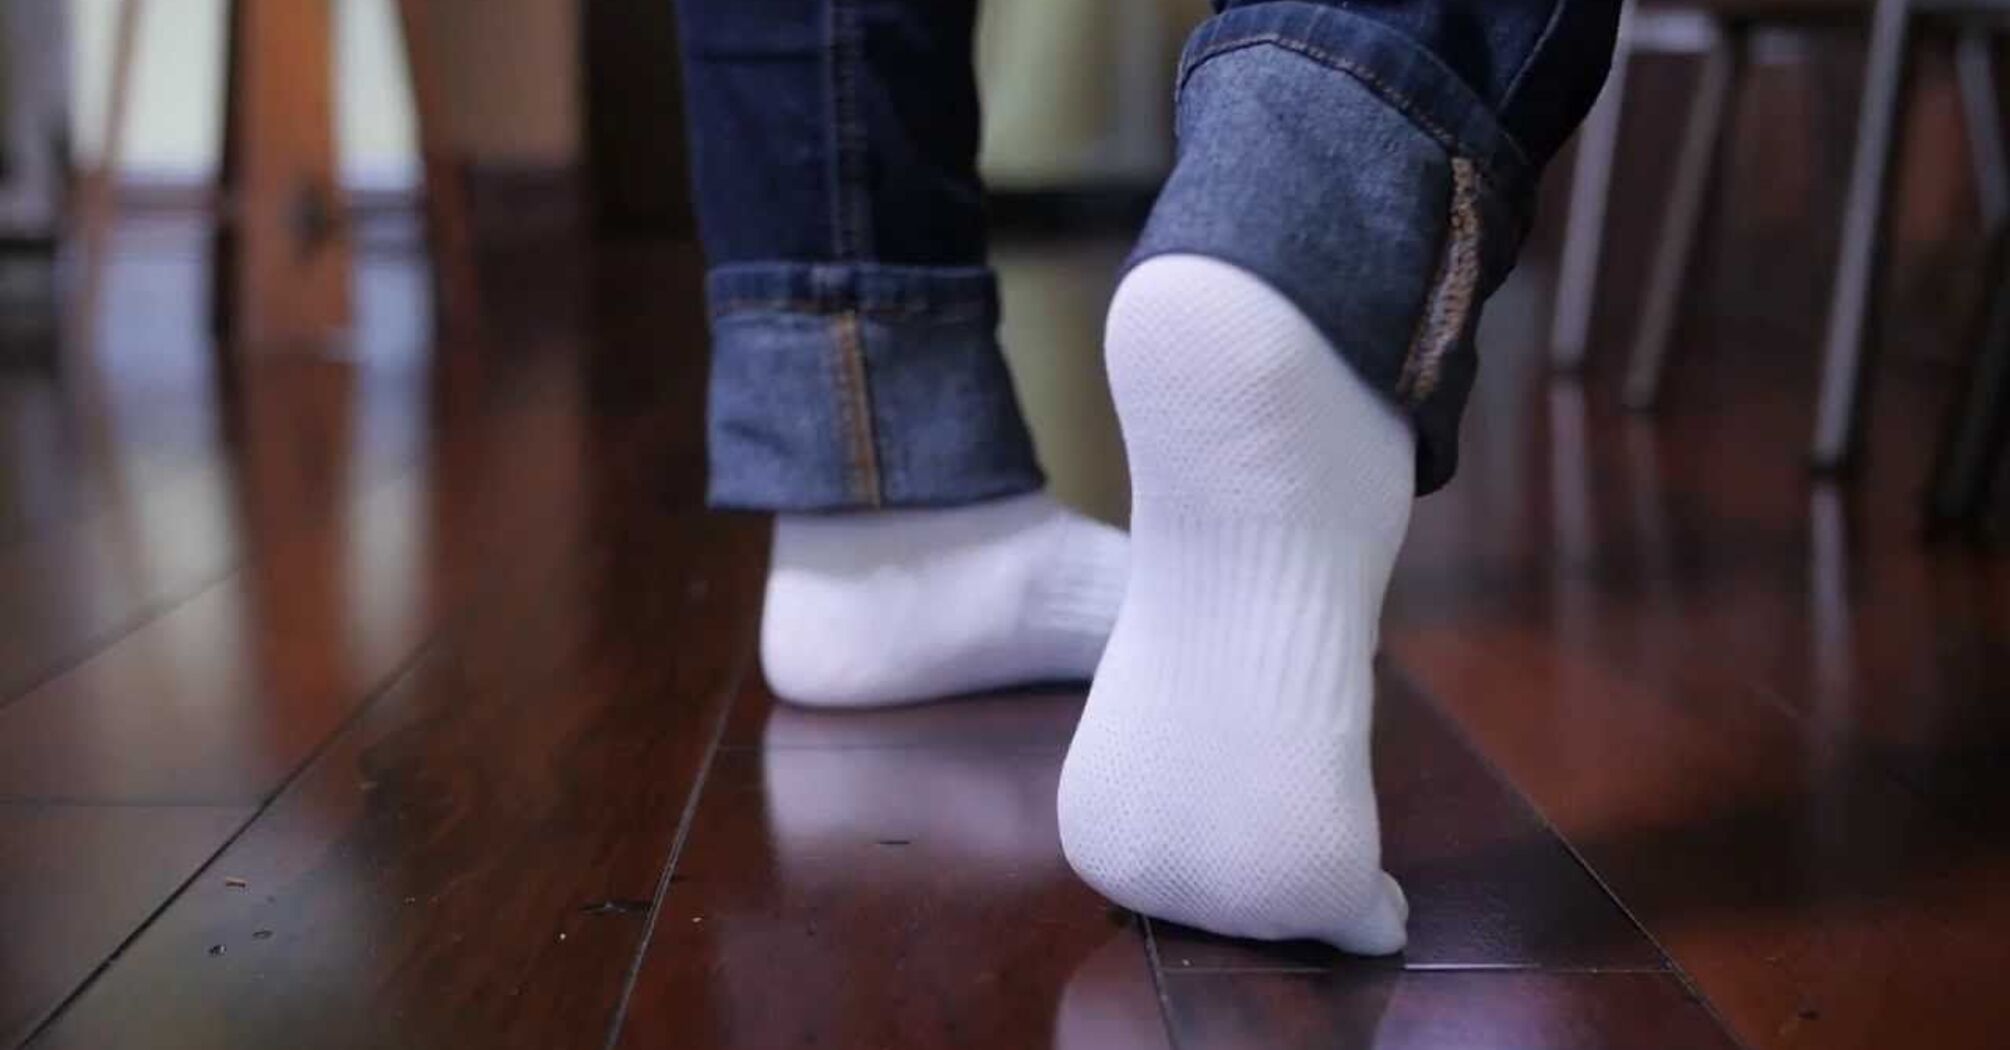 What to add to floor cleaning water to keep socks clean